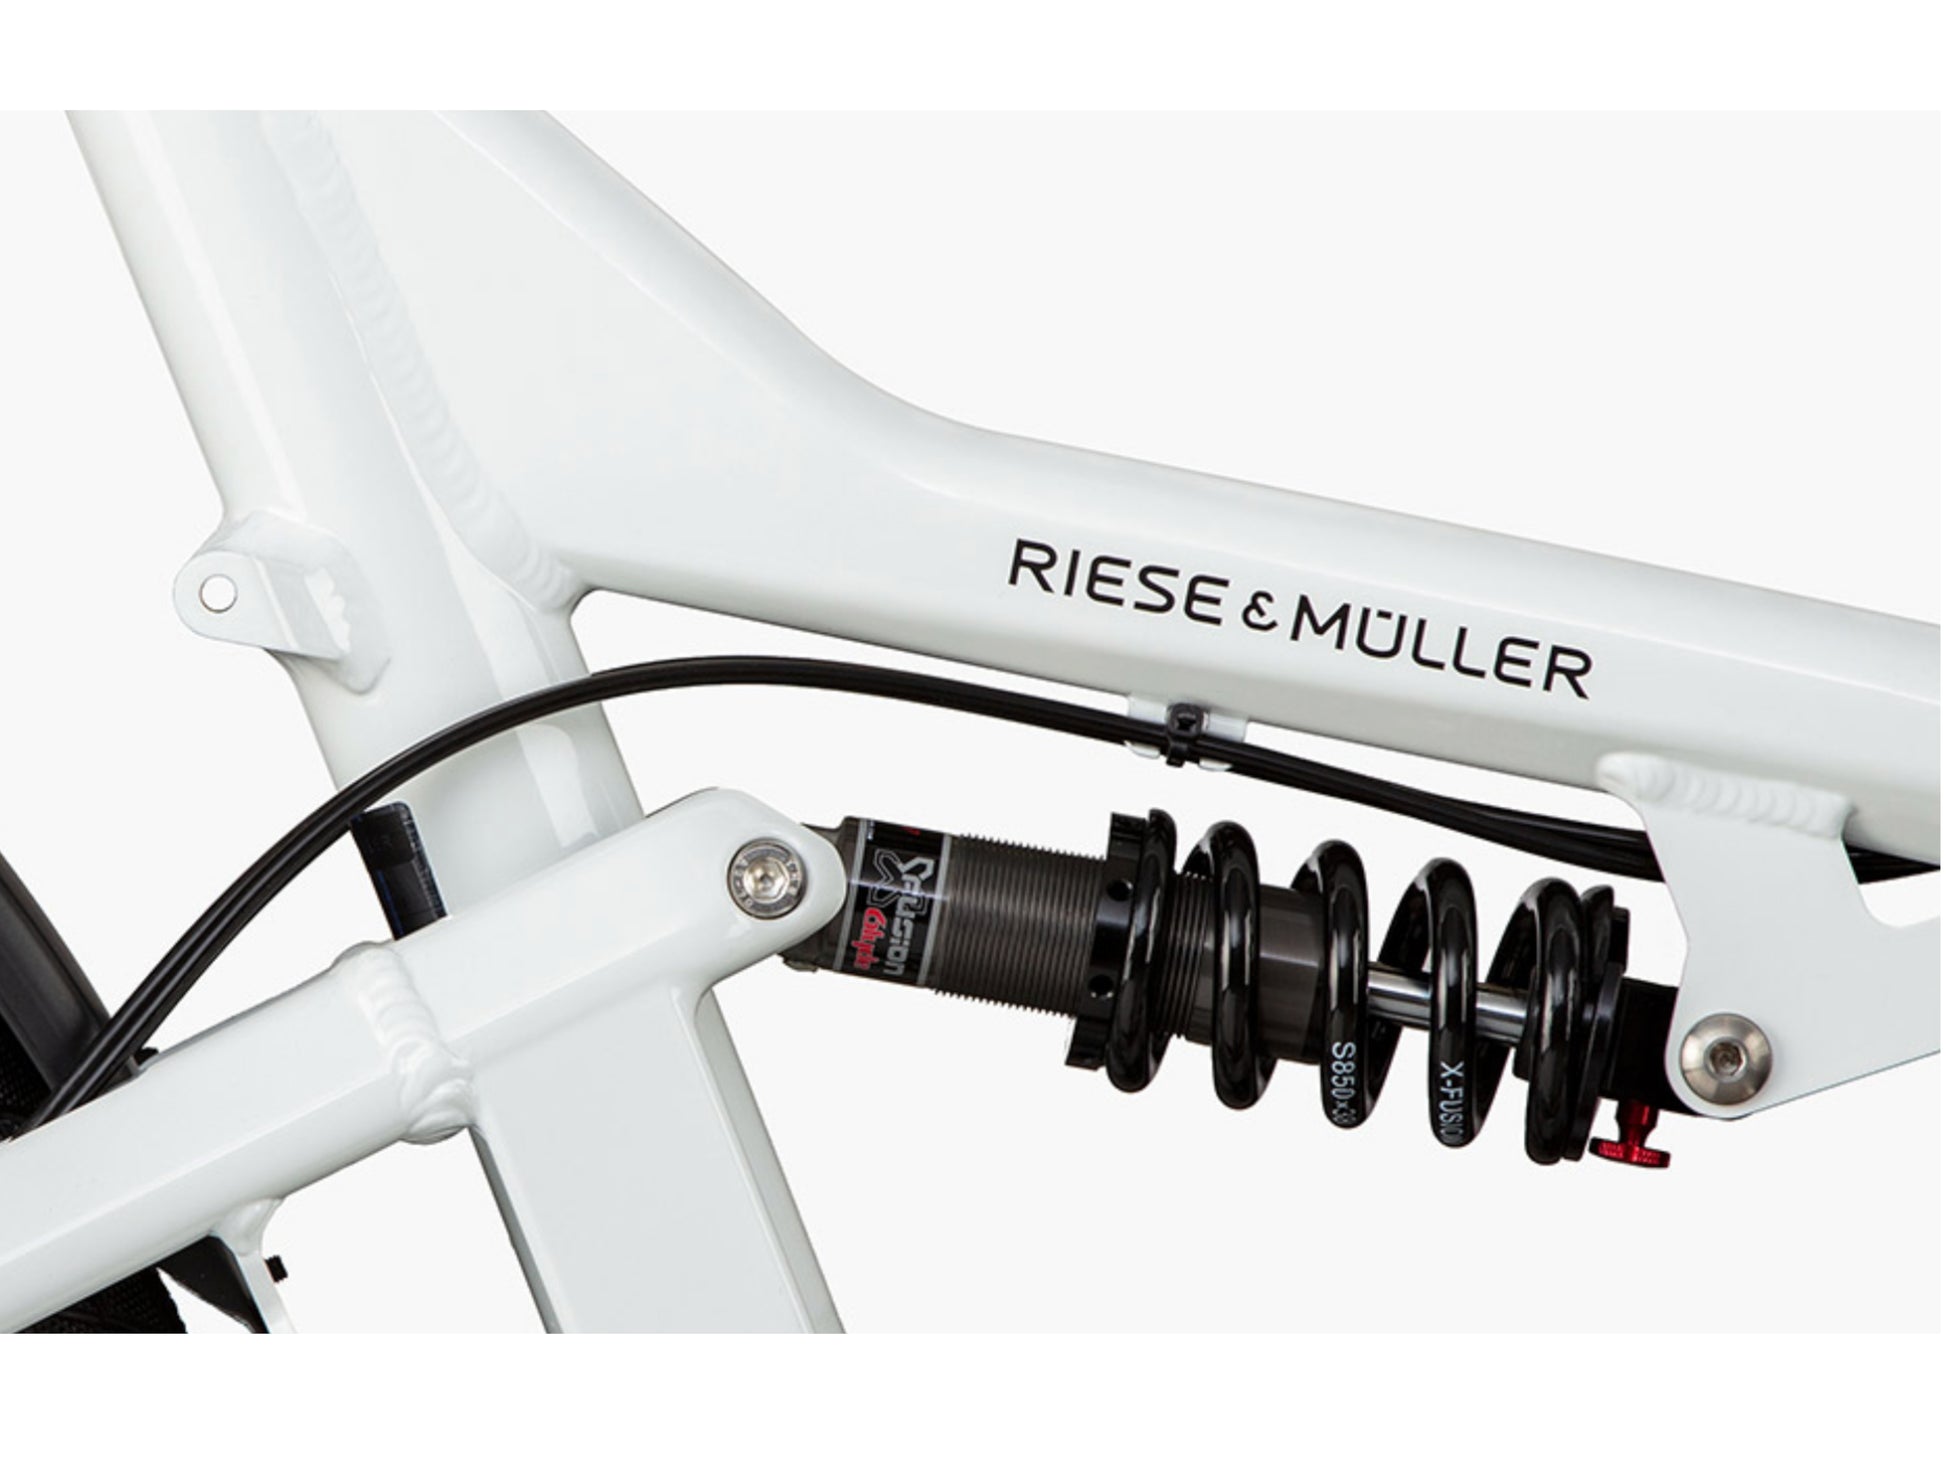 Riese & Muller Packster 70 Automatic cargo eMTB hardtail close up control technology rack option